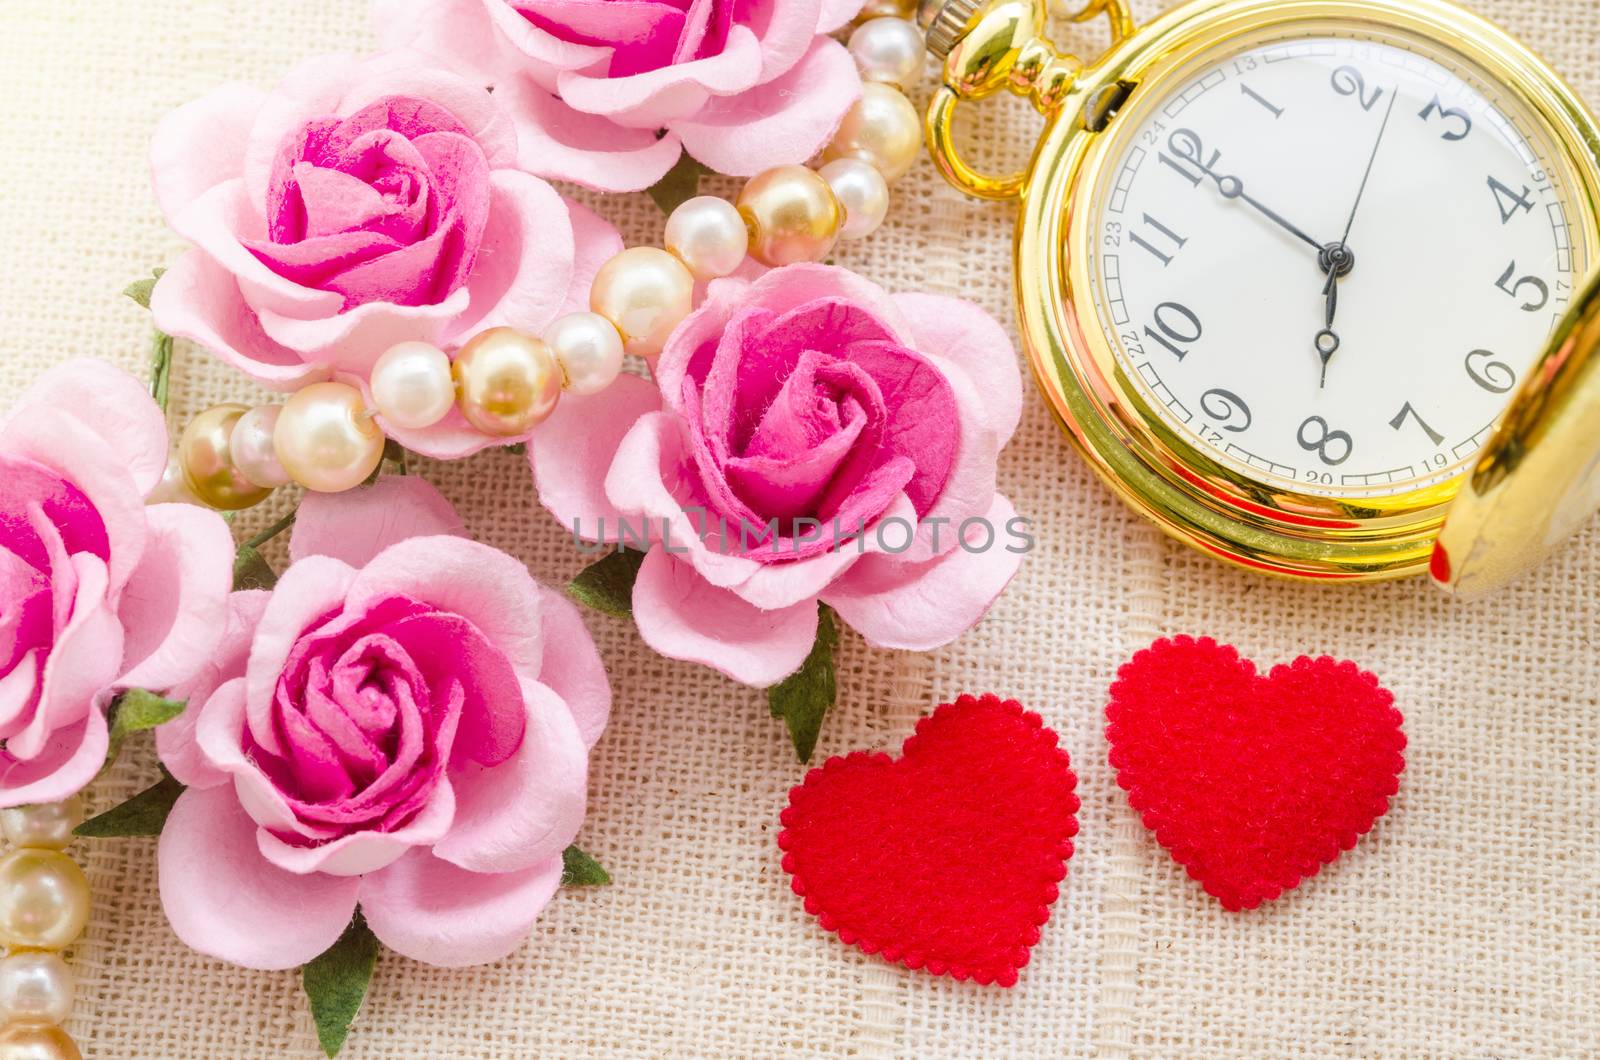 Red heart and pink rose with gold pocket watch. by Gamjai